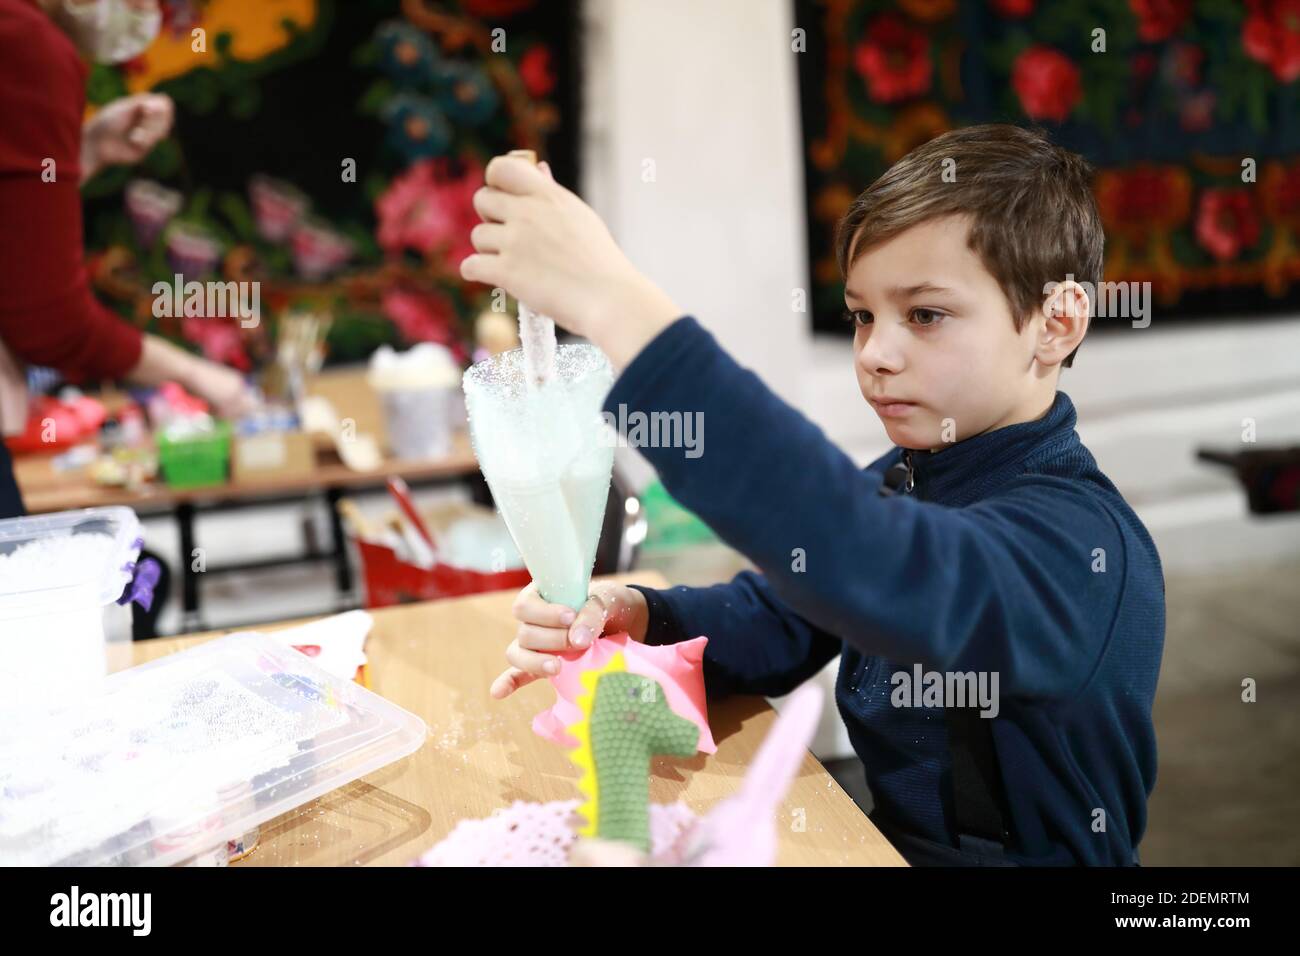 Child filling toy with styrofoam balls in workshop Stock Photo